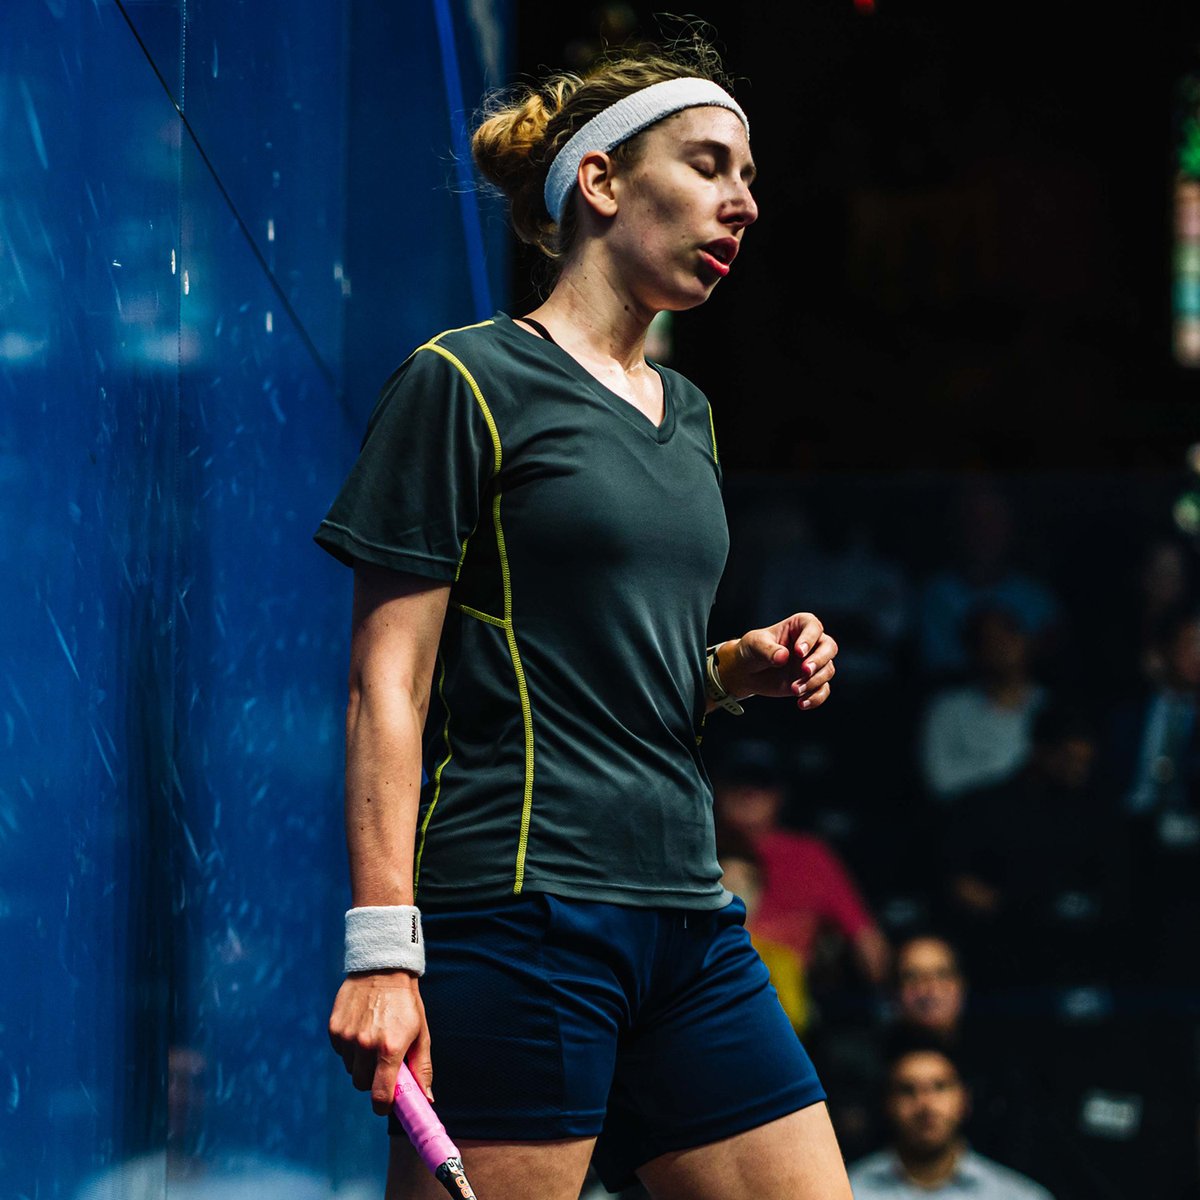 Good luck to #Karakal player @alilokesquash at the @PSAChallenger Richmond #Squash Open at the Virginia CC in the USA. Ali faces home favourite and 5th seed Marina Stefanoni in todays 1st round. #KarakalKrew @WorldSquash @Los_Angeles2024 @sqwales